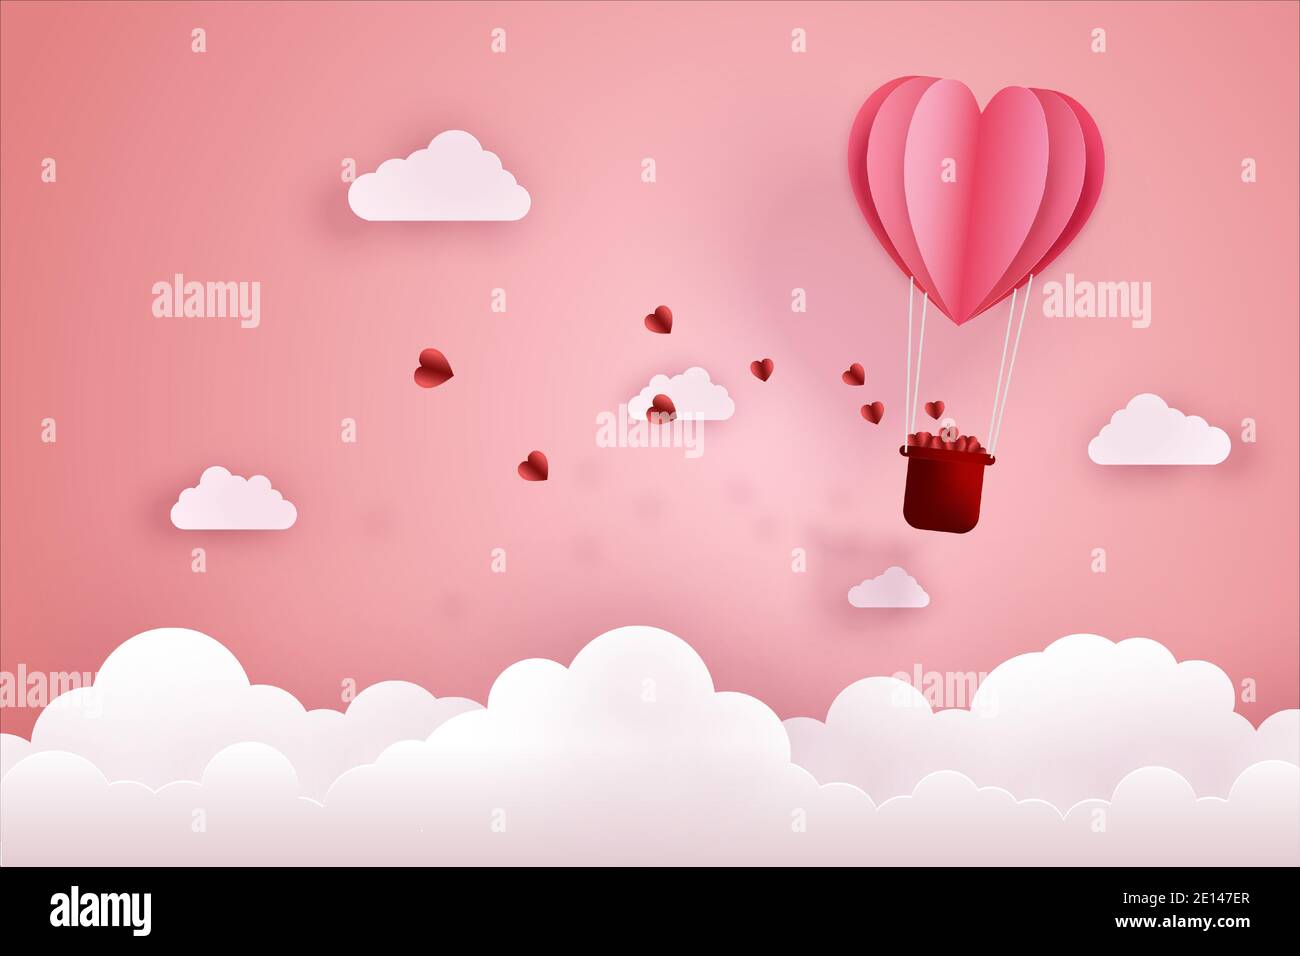 Paper cut art and digital craft style of love and valentine concept. Origami of hot air balloon flying over sky and cloud with floating hearts. Stock Vector